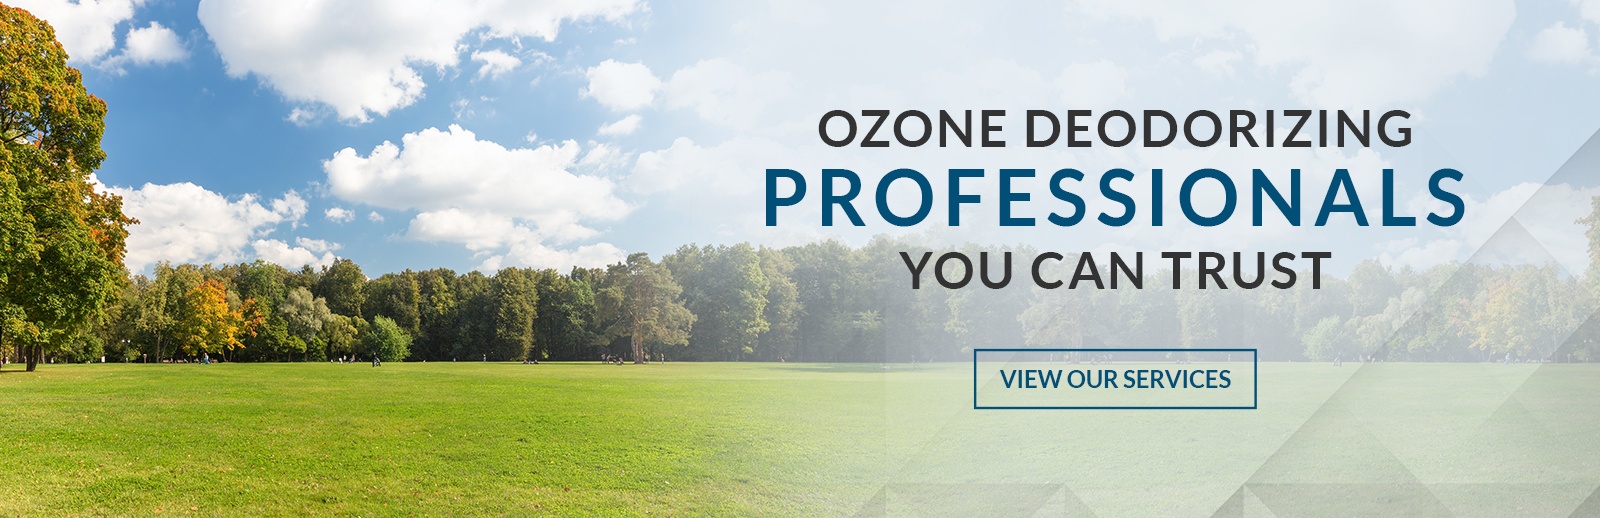 Ozone Deodorizing Services in Niagara by Elementary Property Inspections